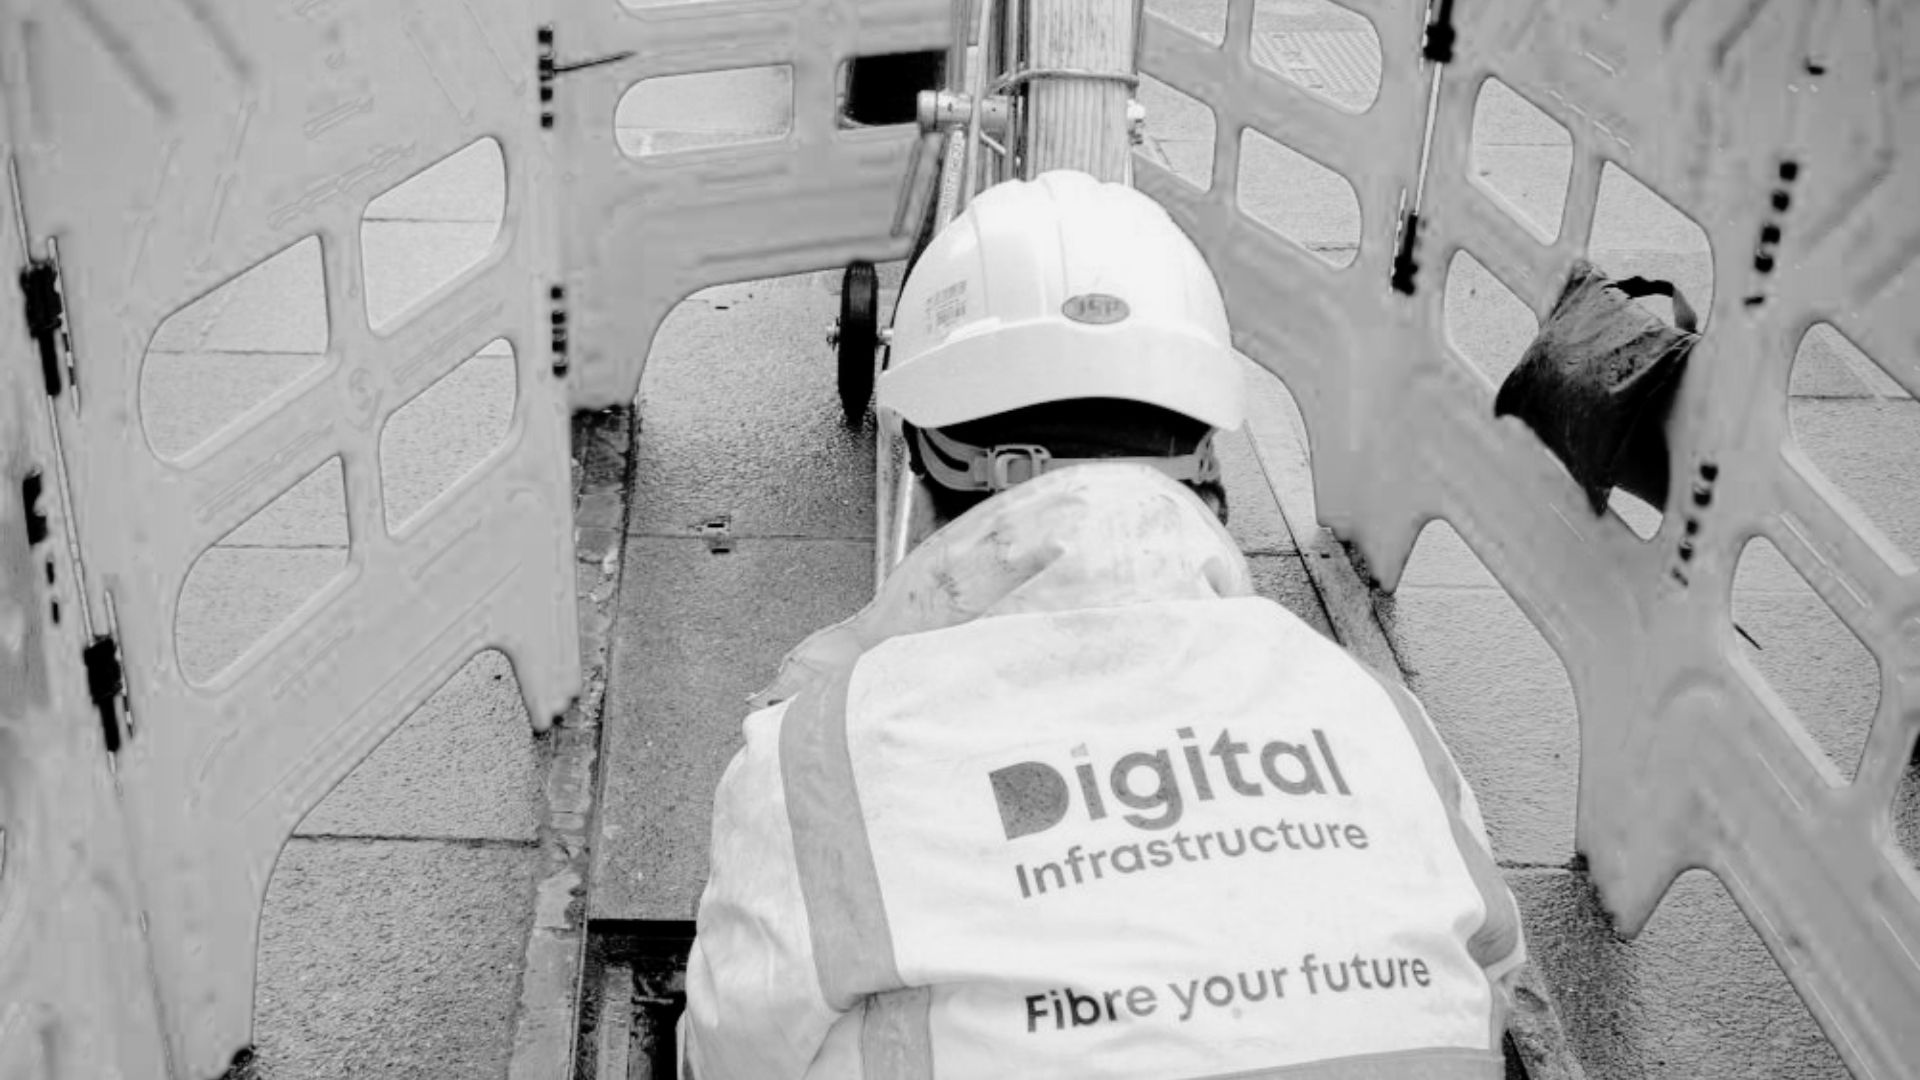 Digital Infrastructure Announces Expansion of BeFibre’s Future-Ready Broadband to Key UK Areas